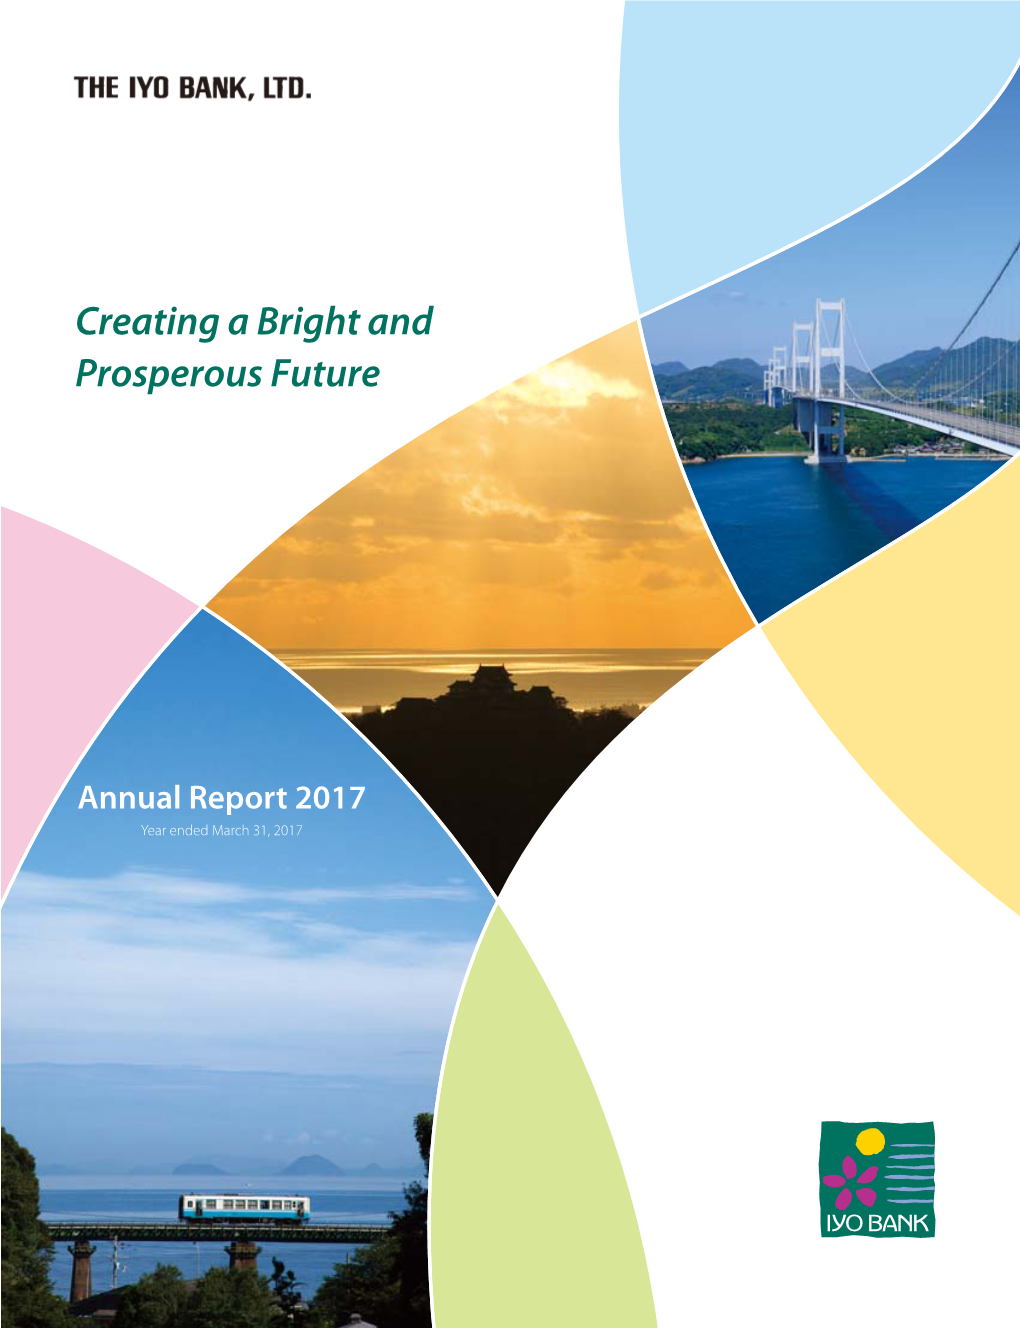 Annual Report 2017(FY2016)